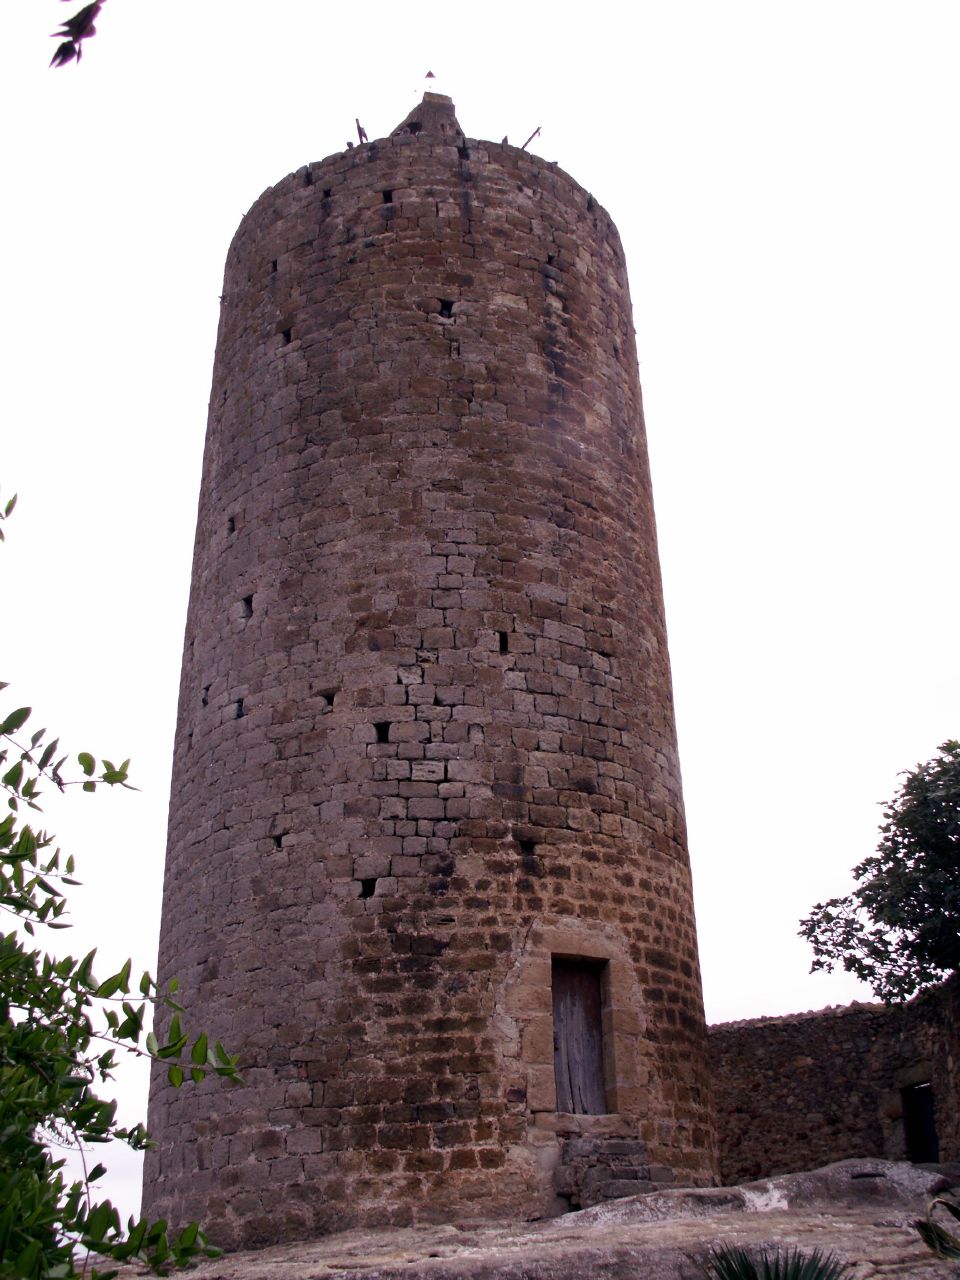 an old brick tower with birds on it